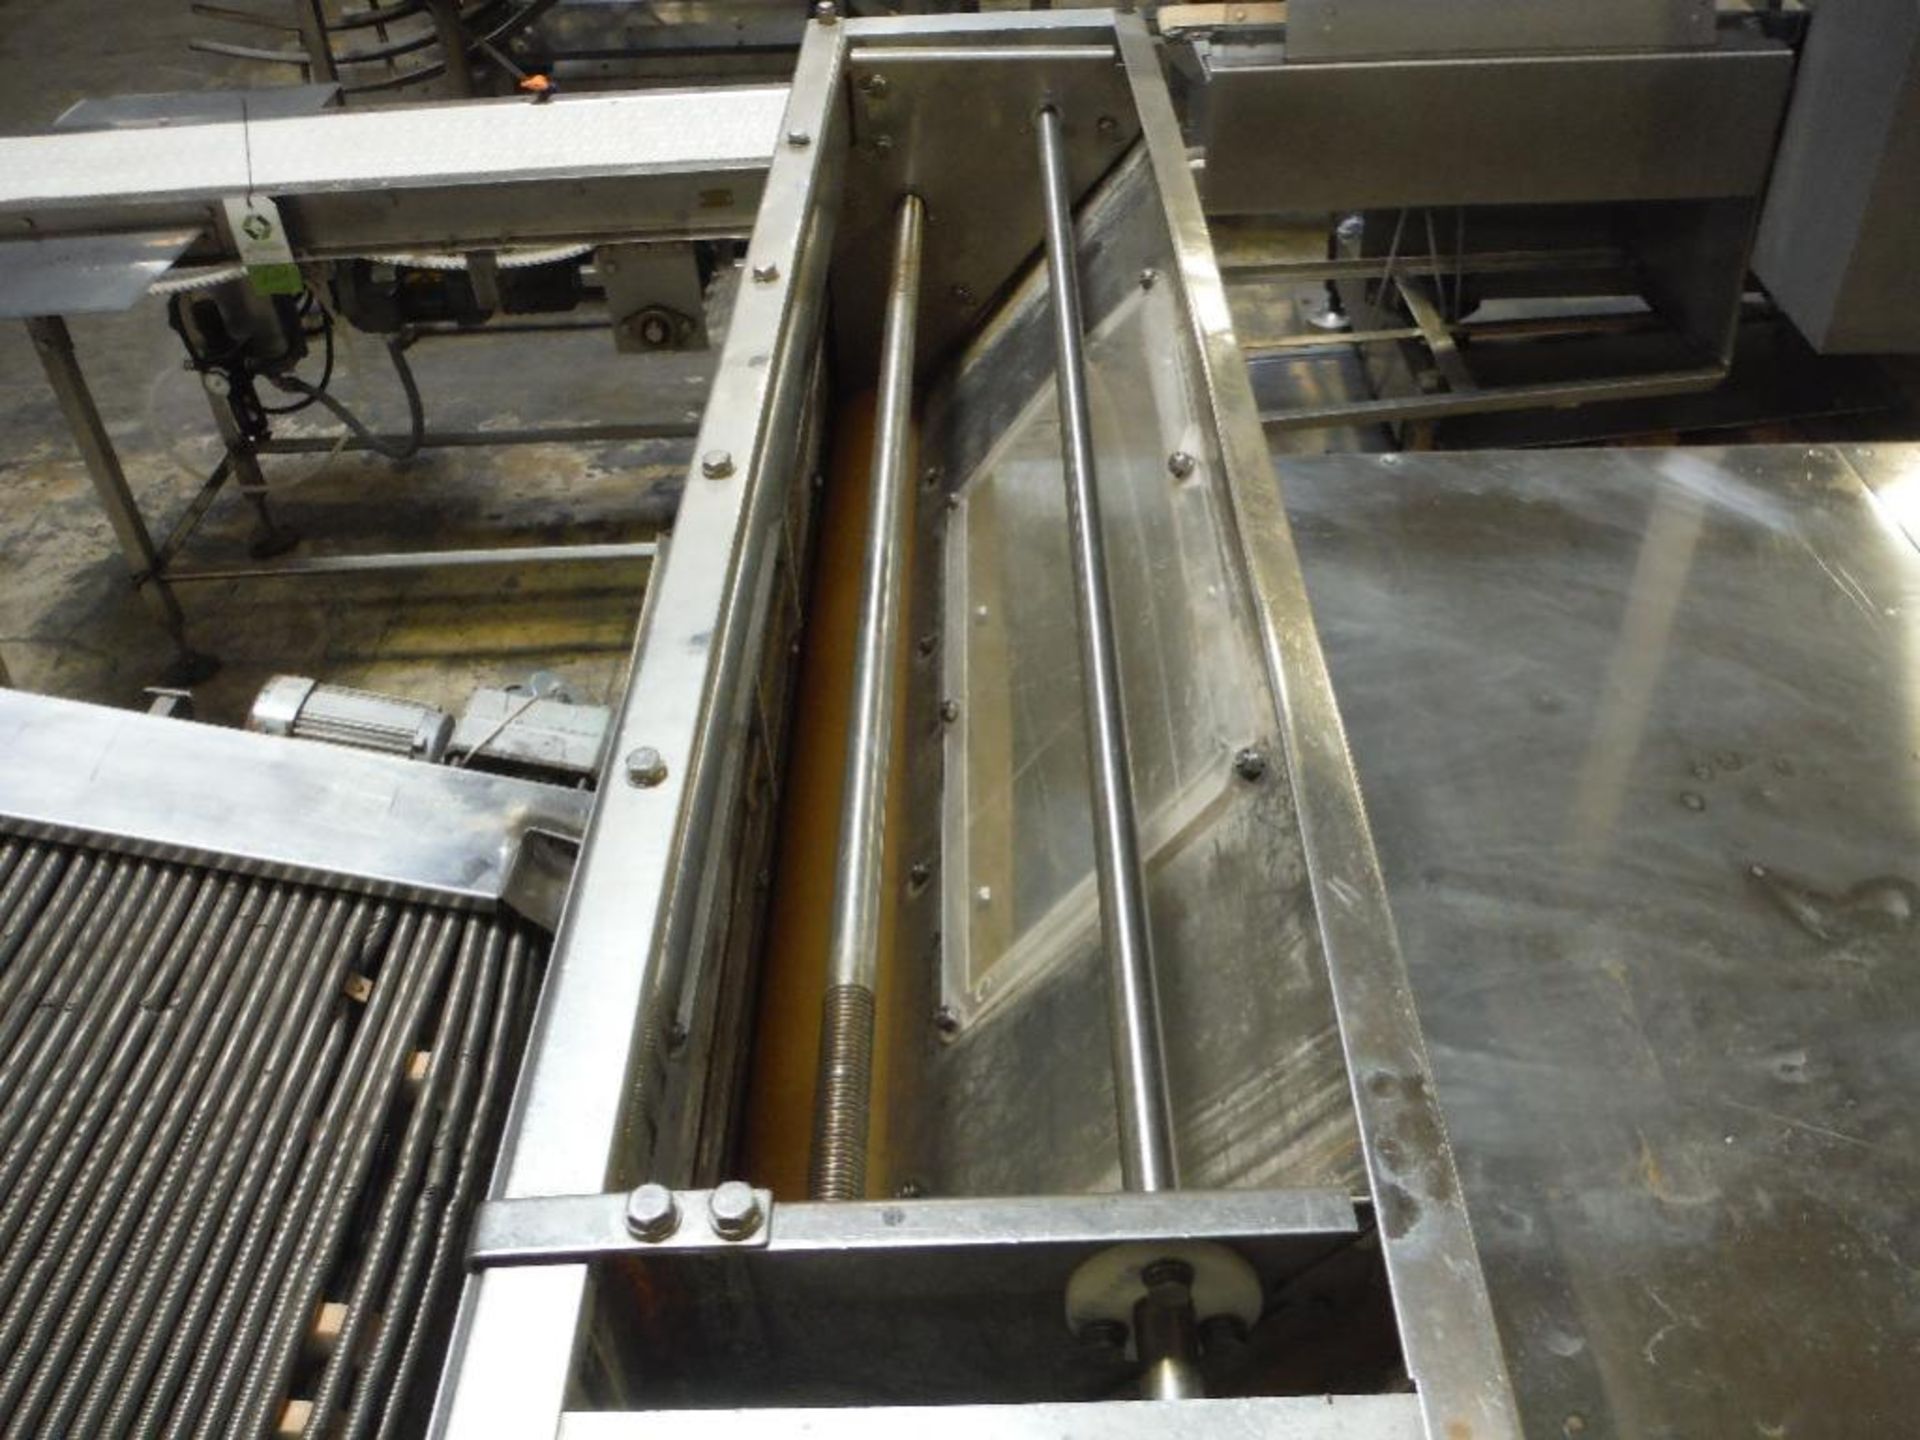 1991 Rheon sheeting conveyor, Model PC213, SN 00011, 180 in. long x 42 in. wide, with 1991 Rheon dou - Image 4 of 16